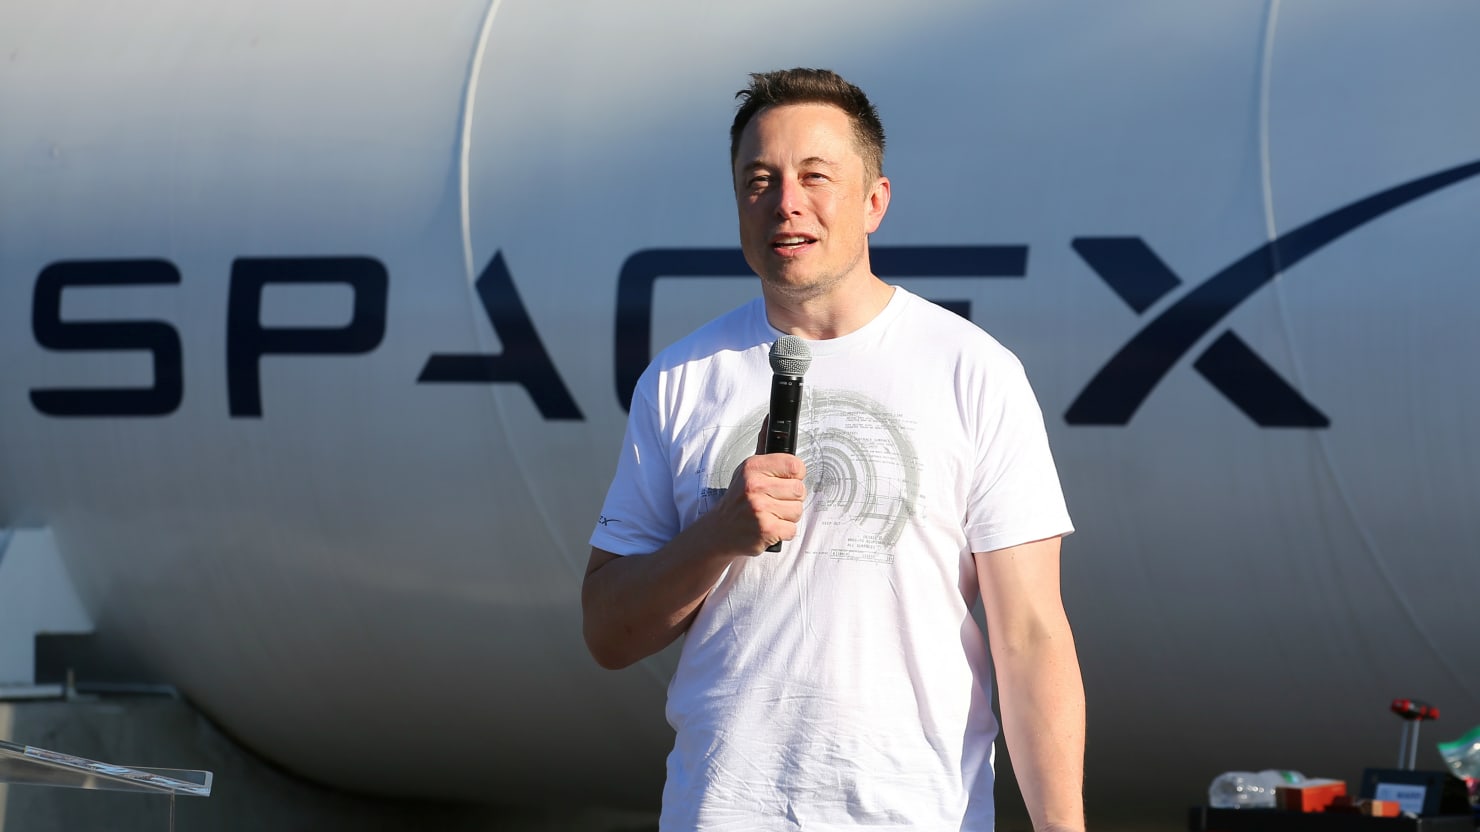 Elon Musk: SpaceX Can Colonize Mars, Build Moon Base